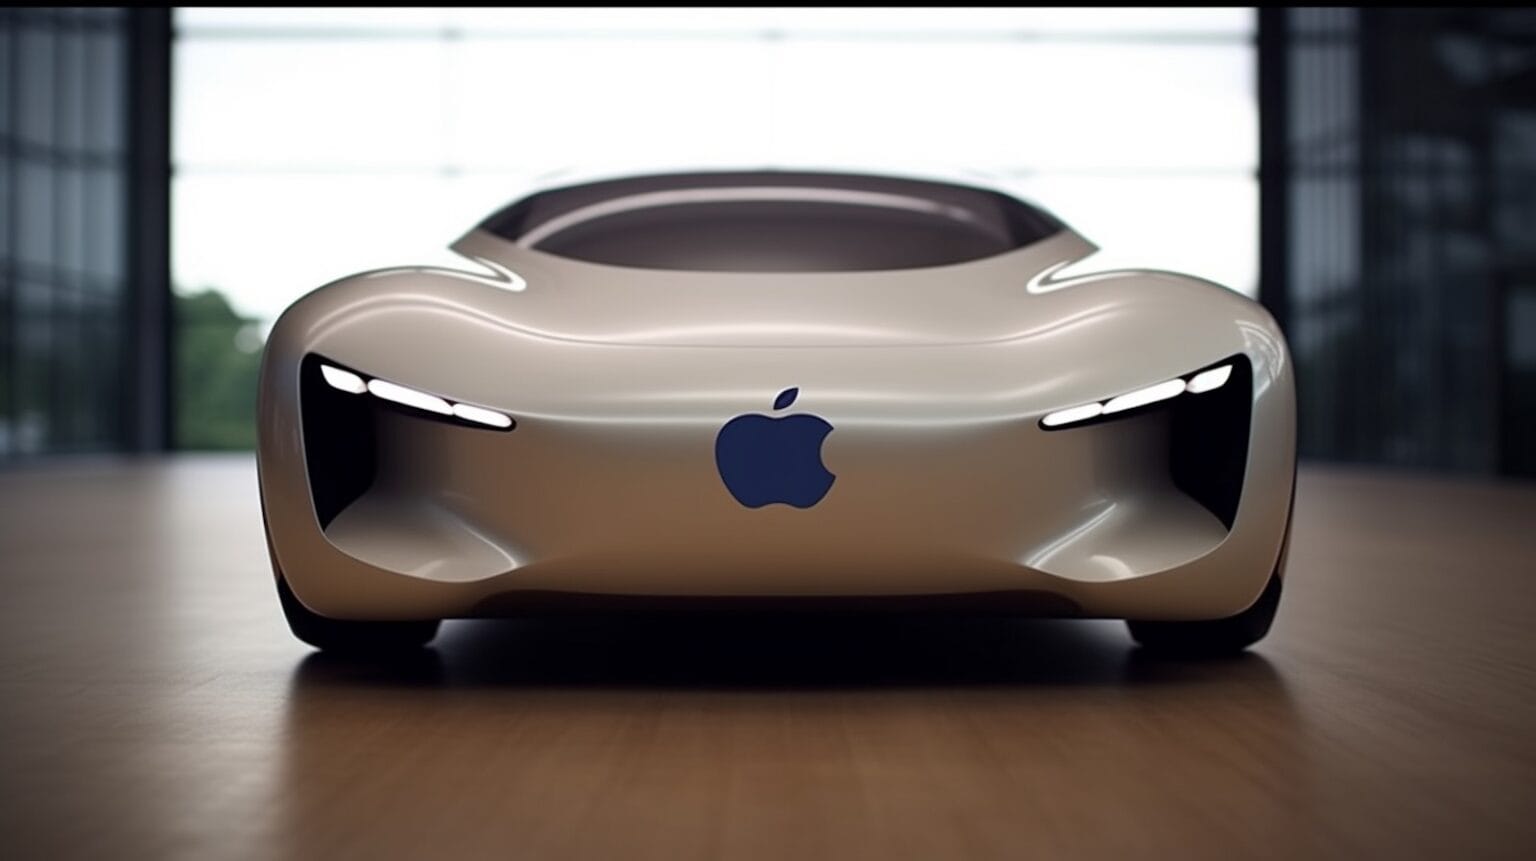 Front view of a glossy white luxury car with an Apple logo